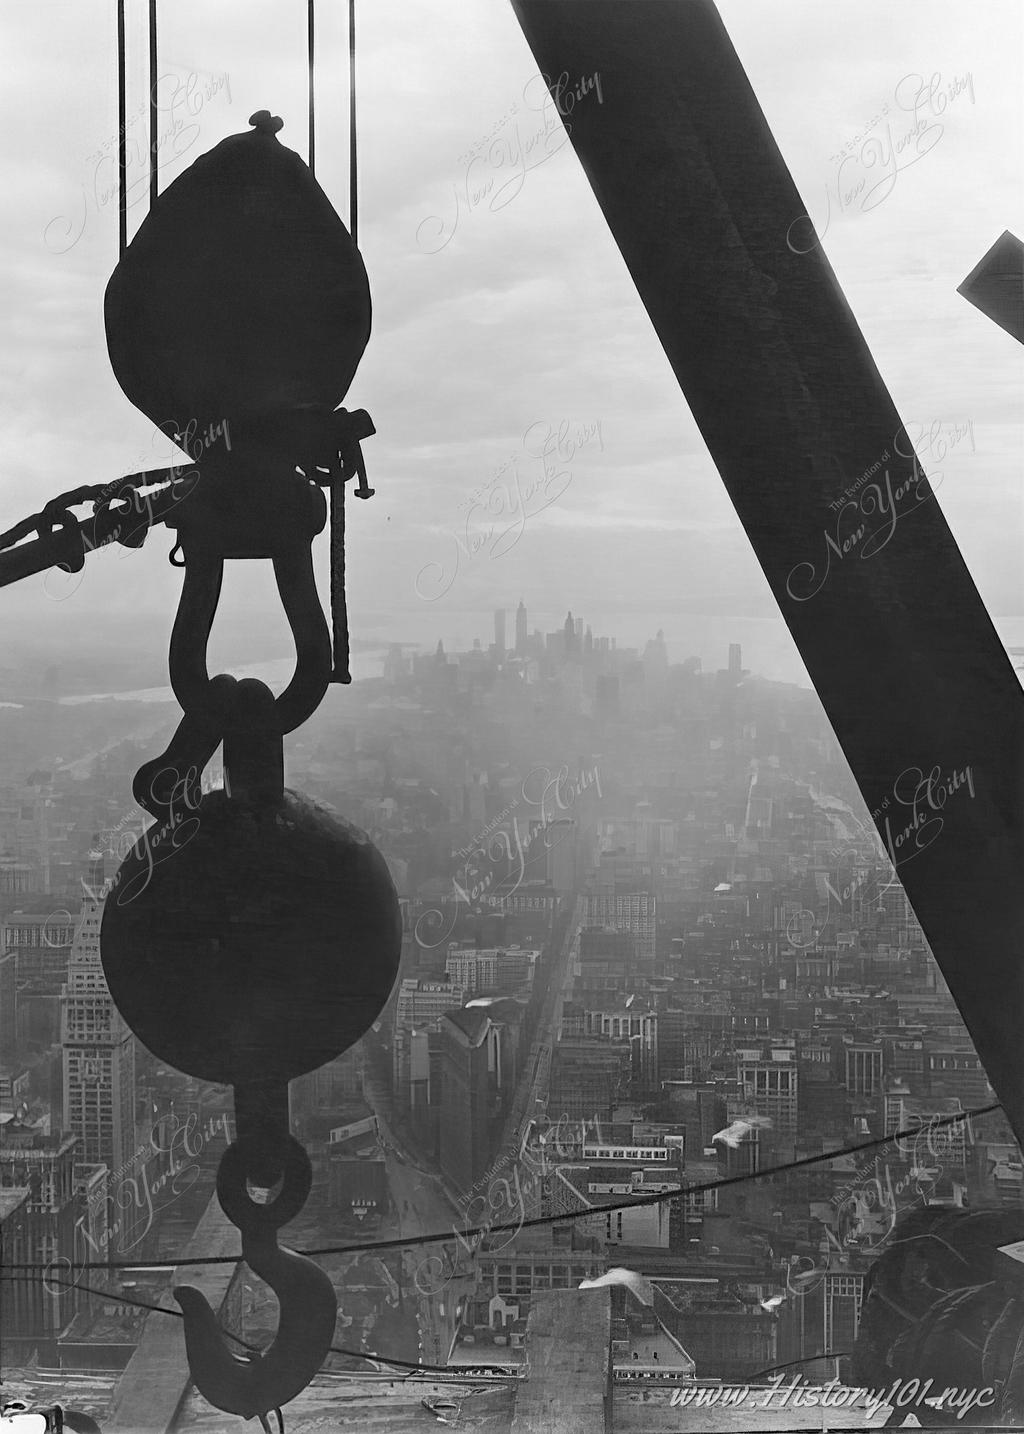 Aerial photograph taken from inside the growing structure of the Empire State Building. An epic view of downtown Manhattan is framed by the silhouette of a massive crane hook and steel beam.